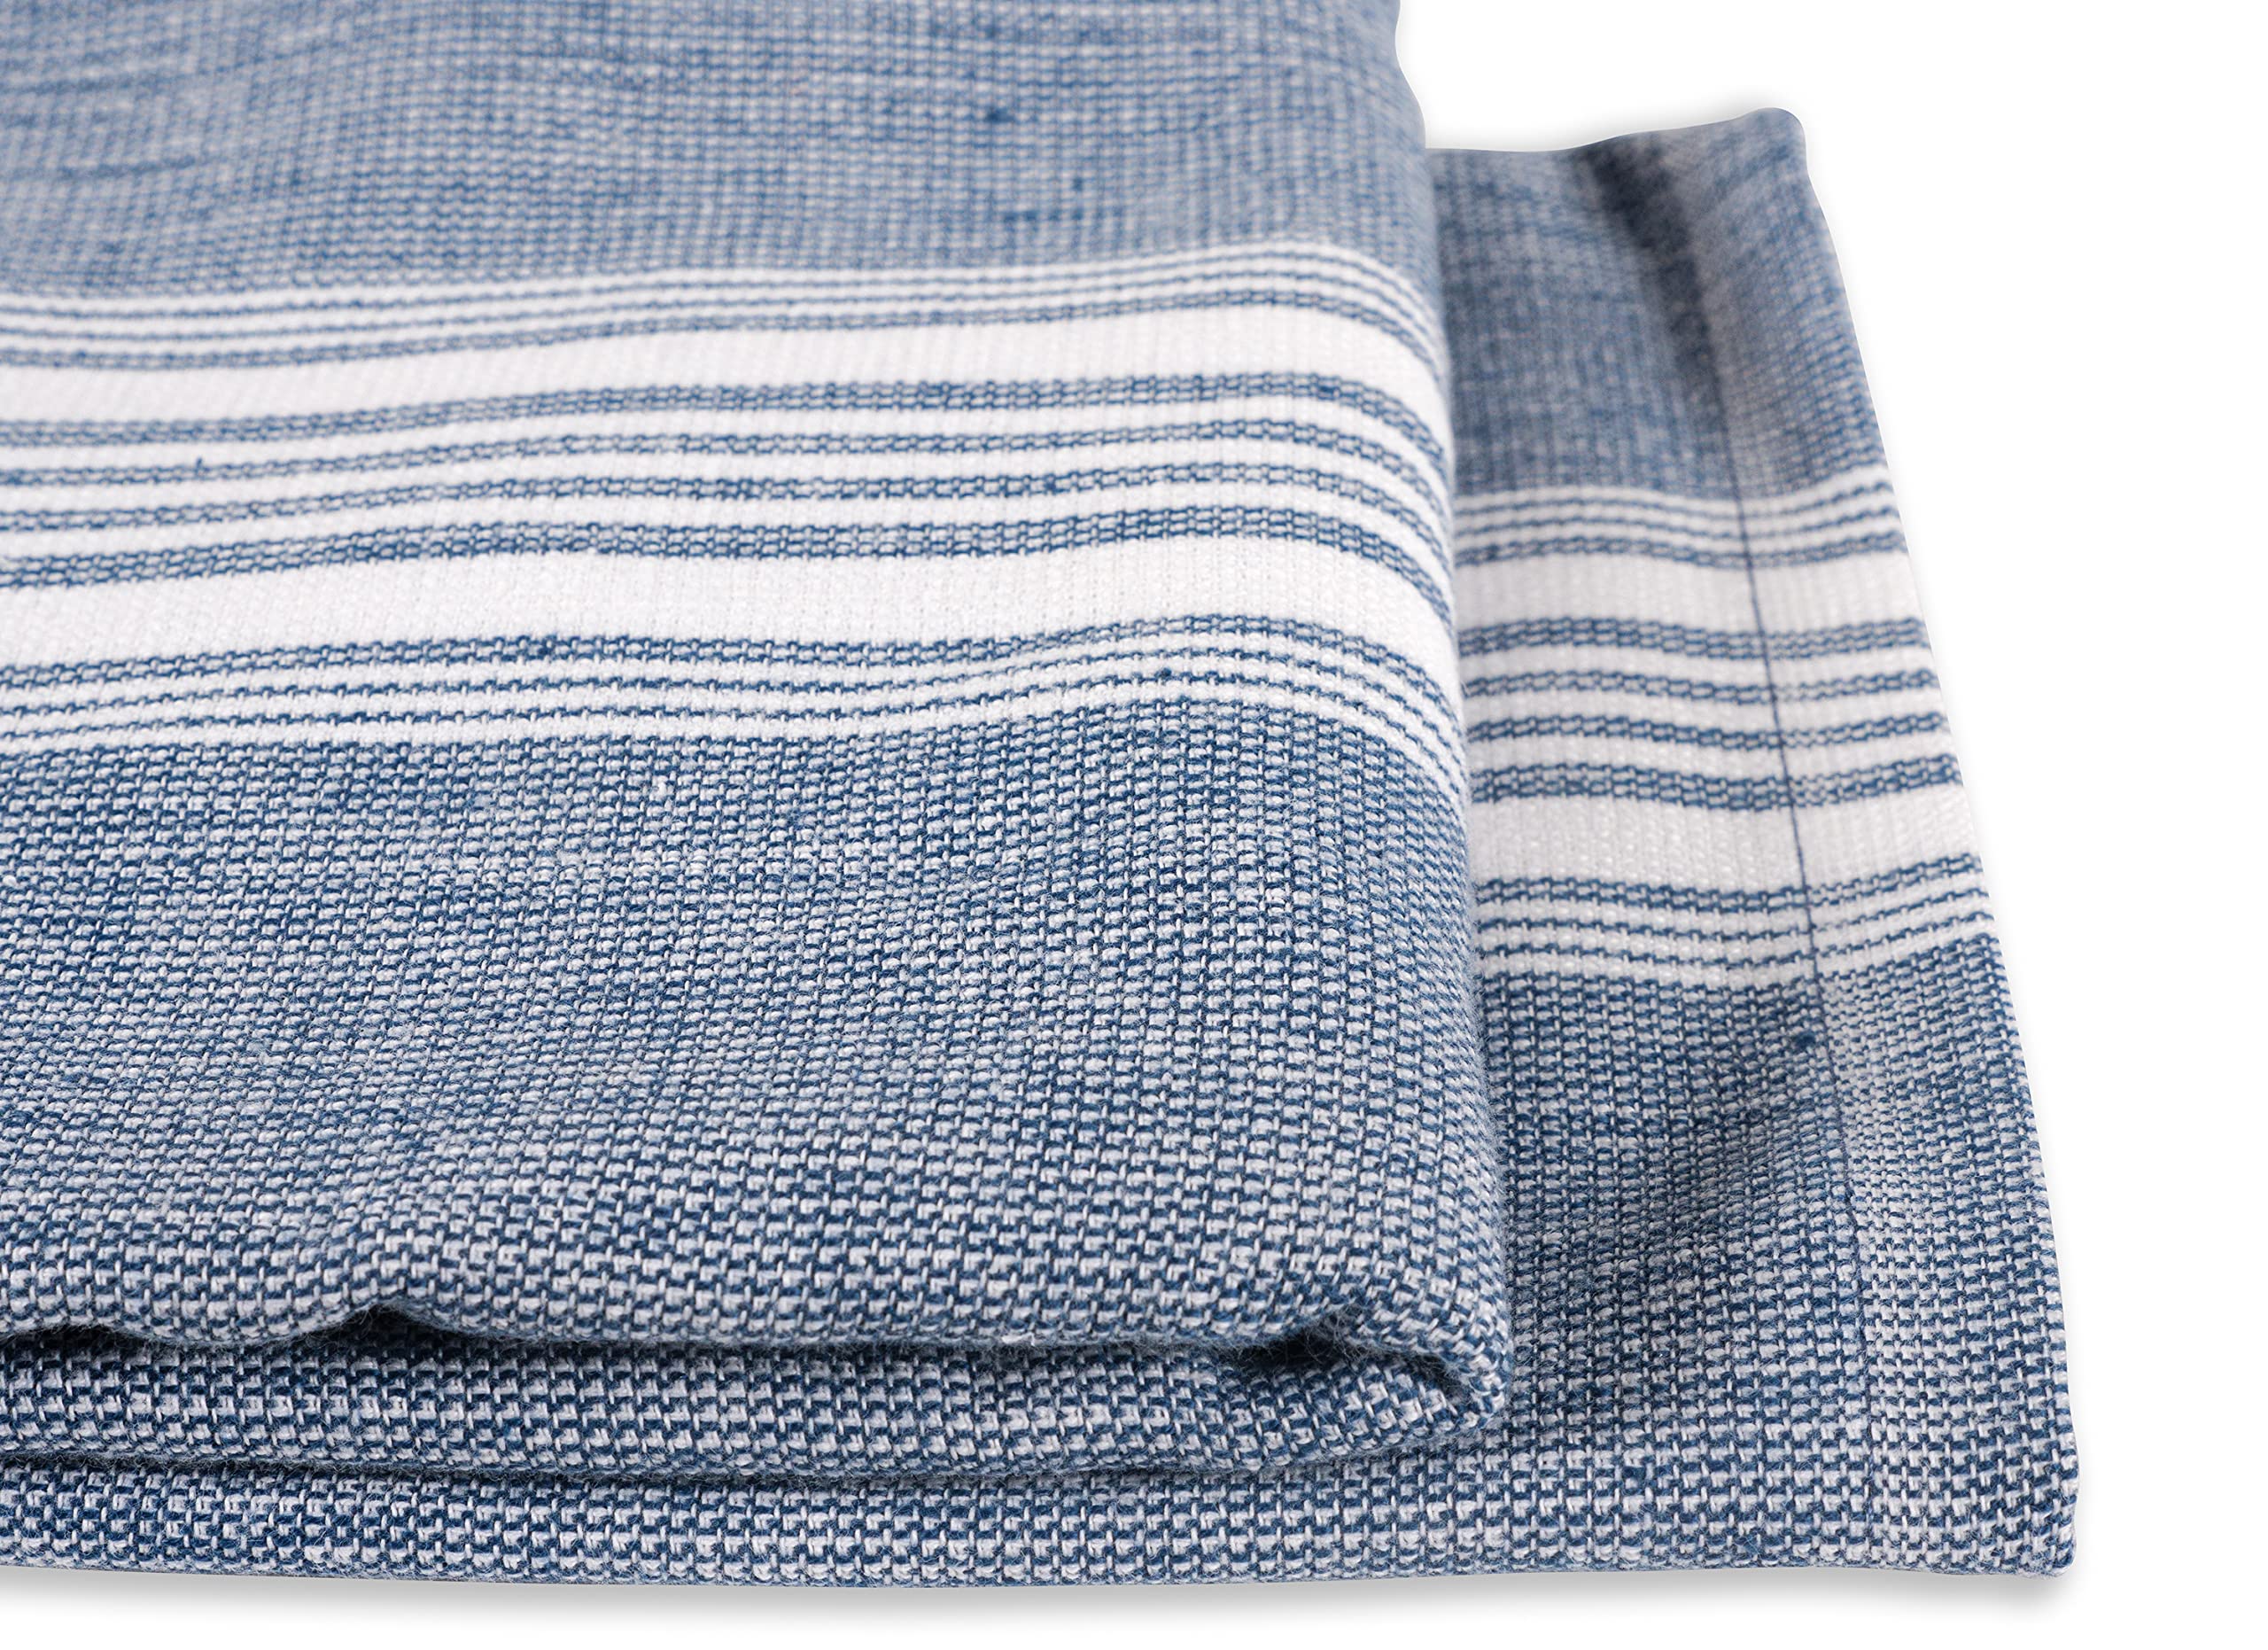 KAF Home Strada Reversible Kitchen Towel - Set of 6, Oversized 20 x 30 Inch, 100% Cotton Dish Towels - Made in Turkey